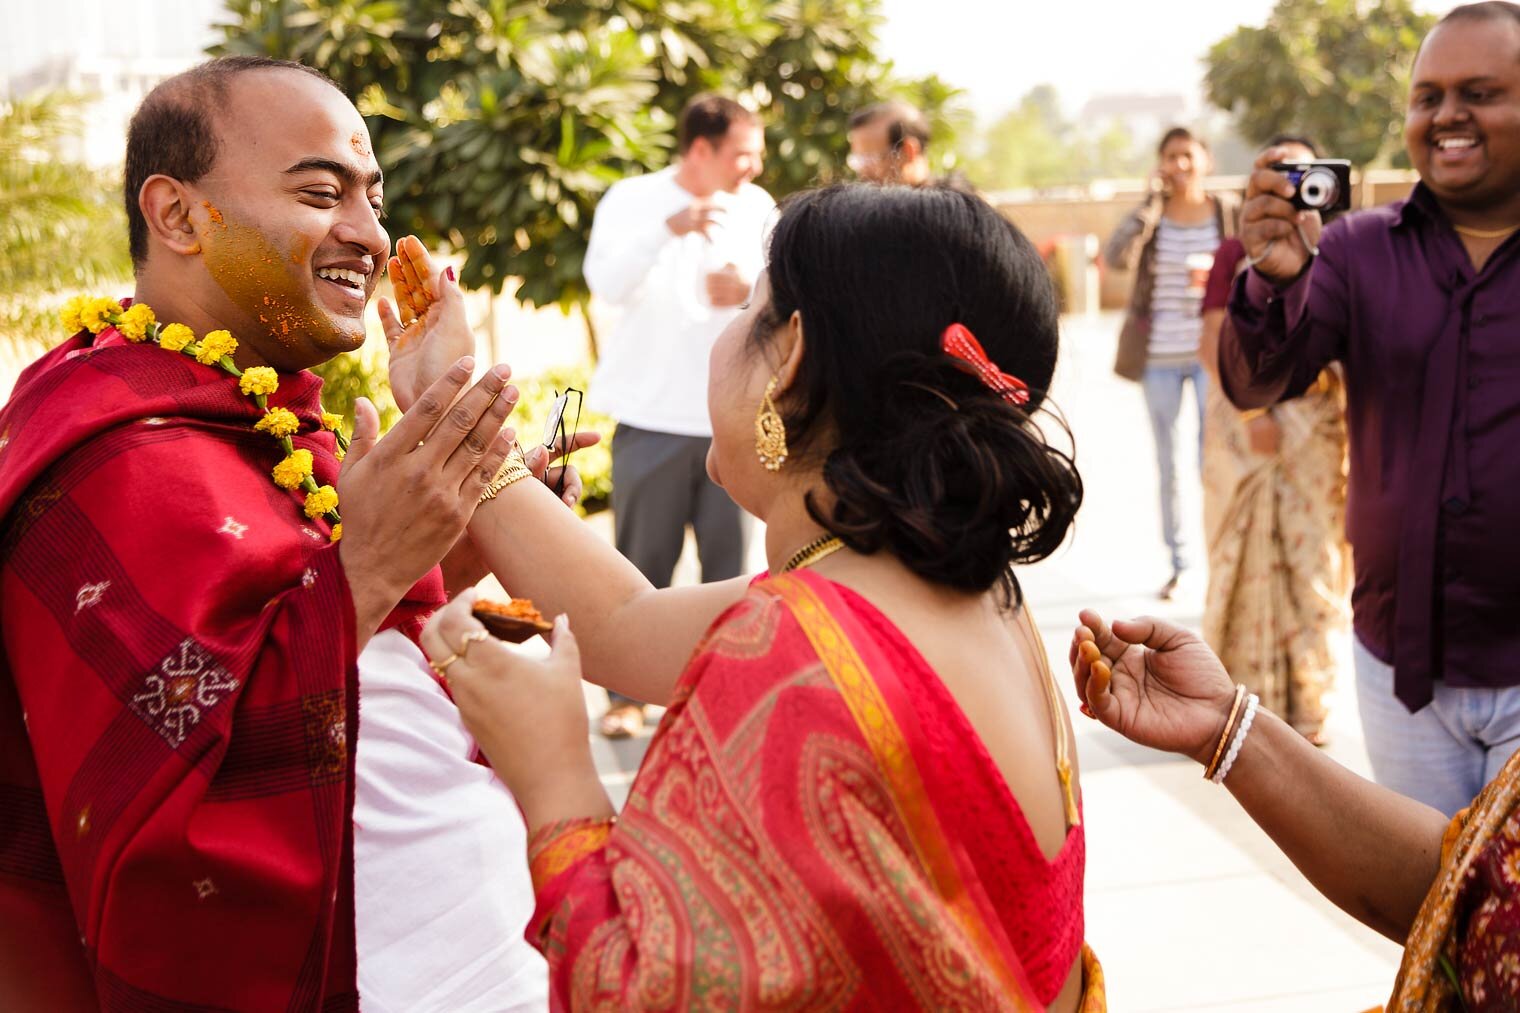 Traditional Indian wedding photography in Delhi and Gurgaon.